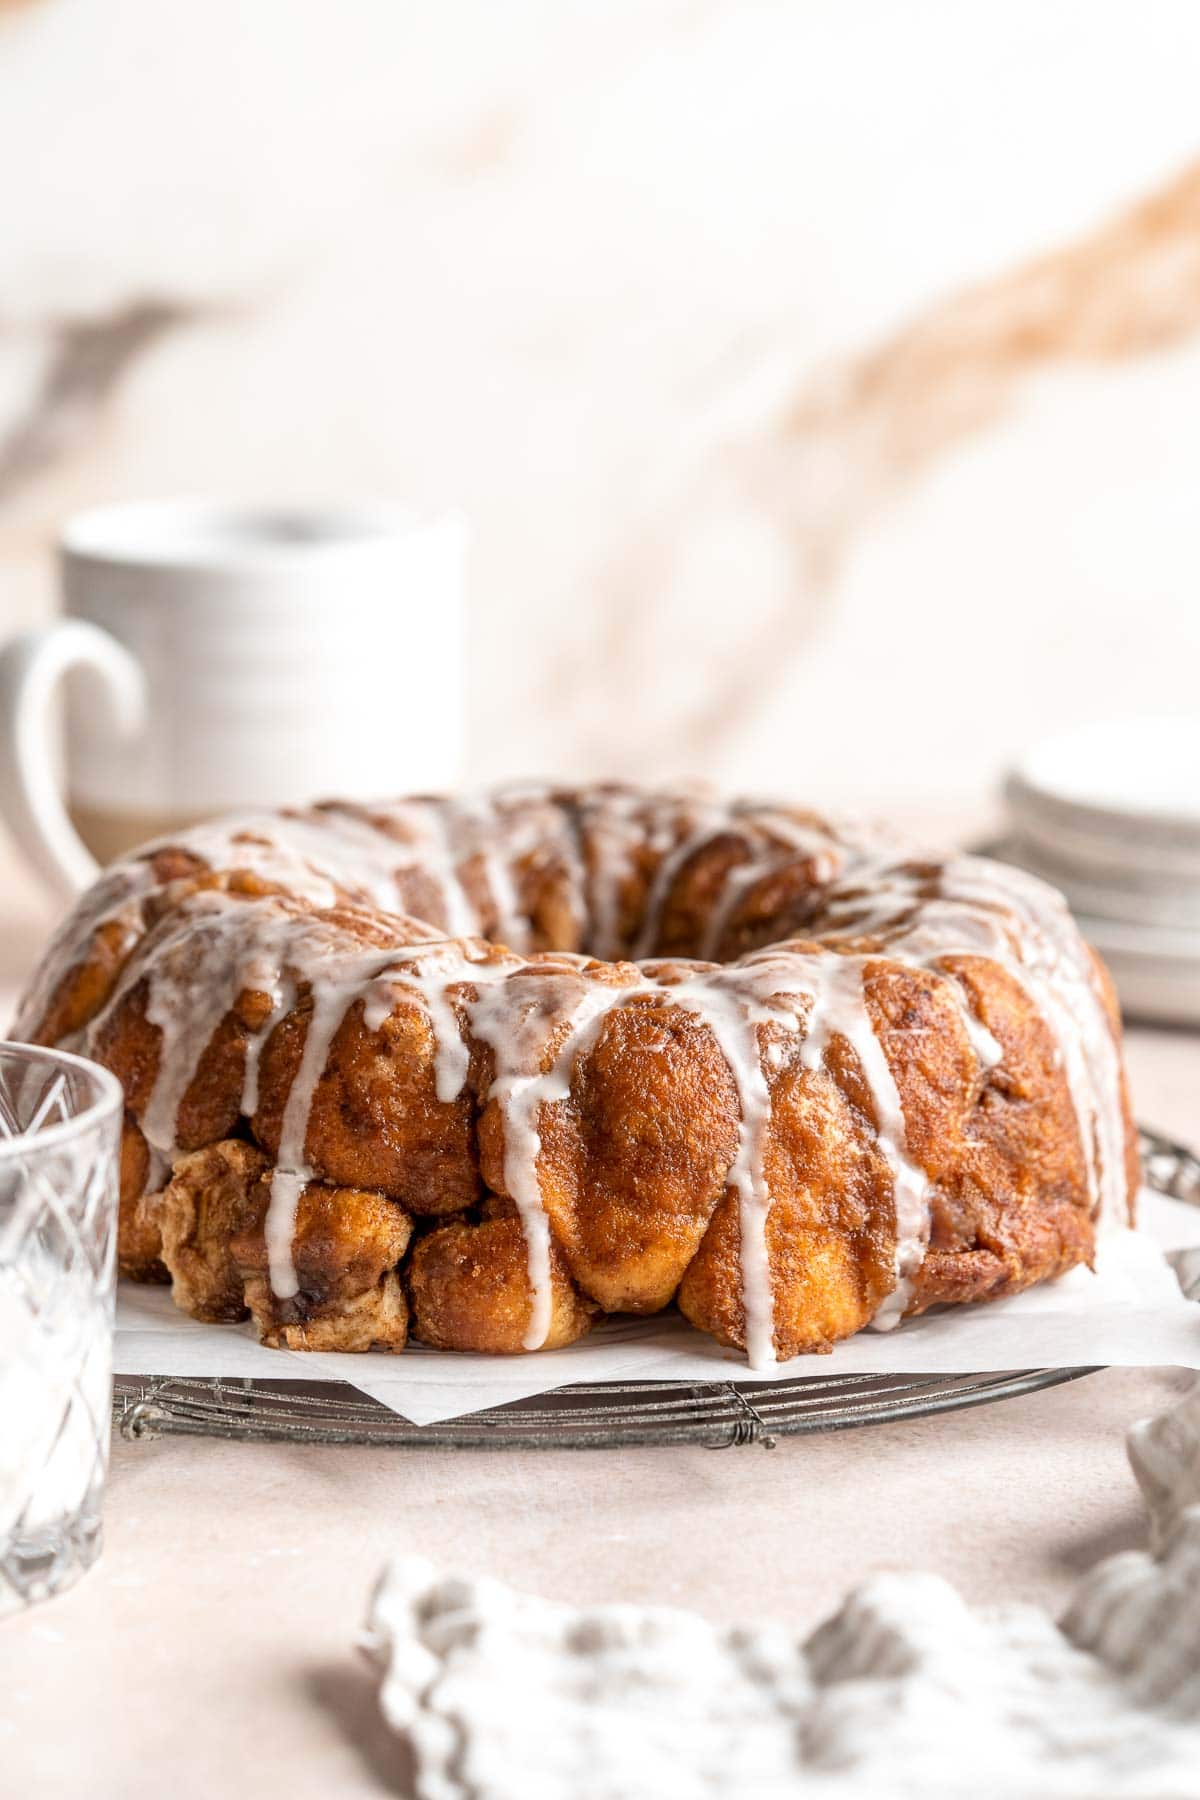 Monkey Bread is a delicious pull apart breakfast pastry made with a super soft dough coated in cinnamon sugar and topped with homemade caramel sauce. | aheadofthyme.com